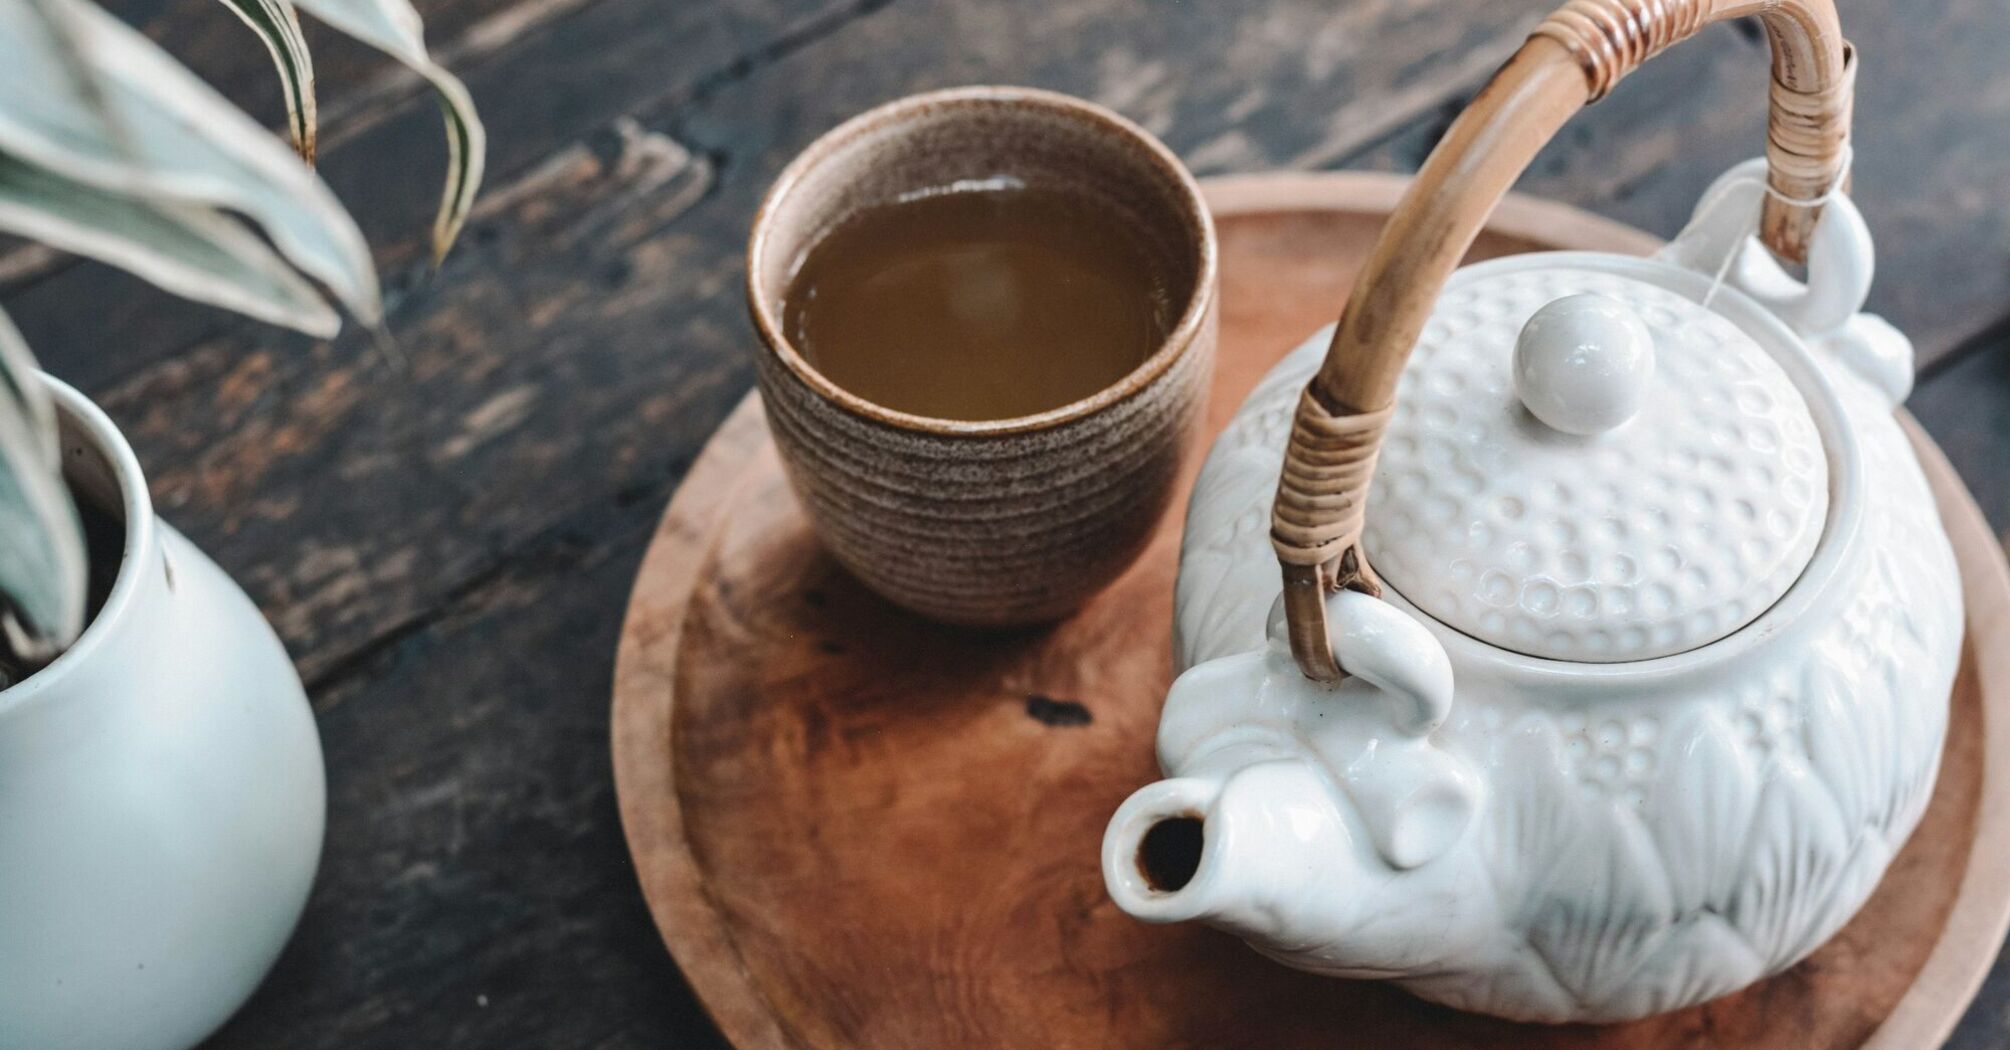 A ceramic teapot and cup of tea on a wooden tray